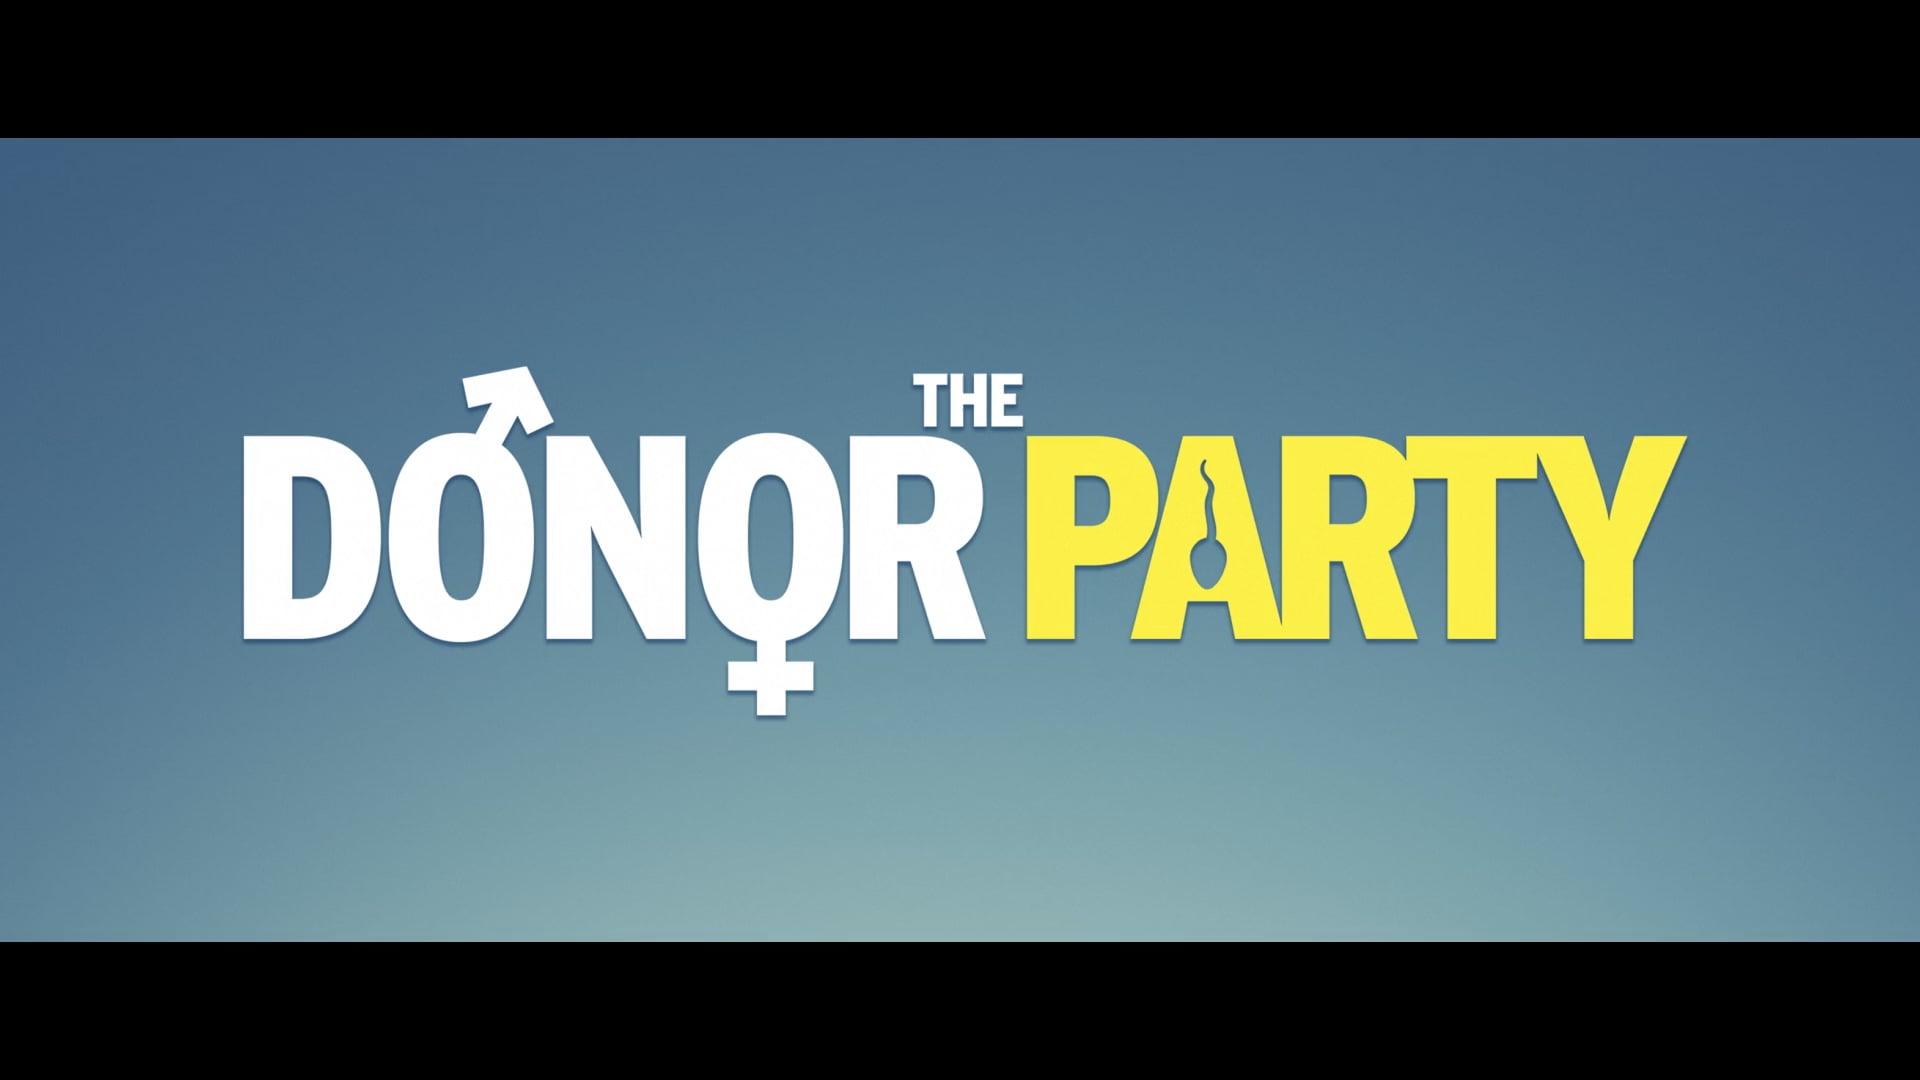 The Donor Party Bande Annonce VF on Vimeo